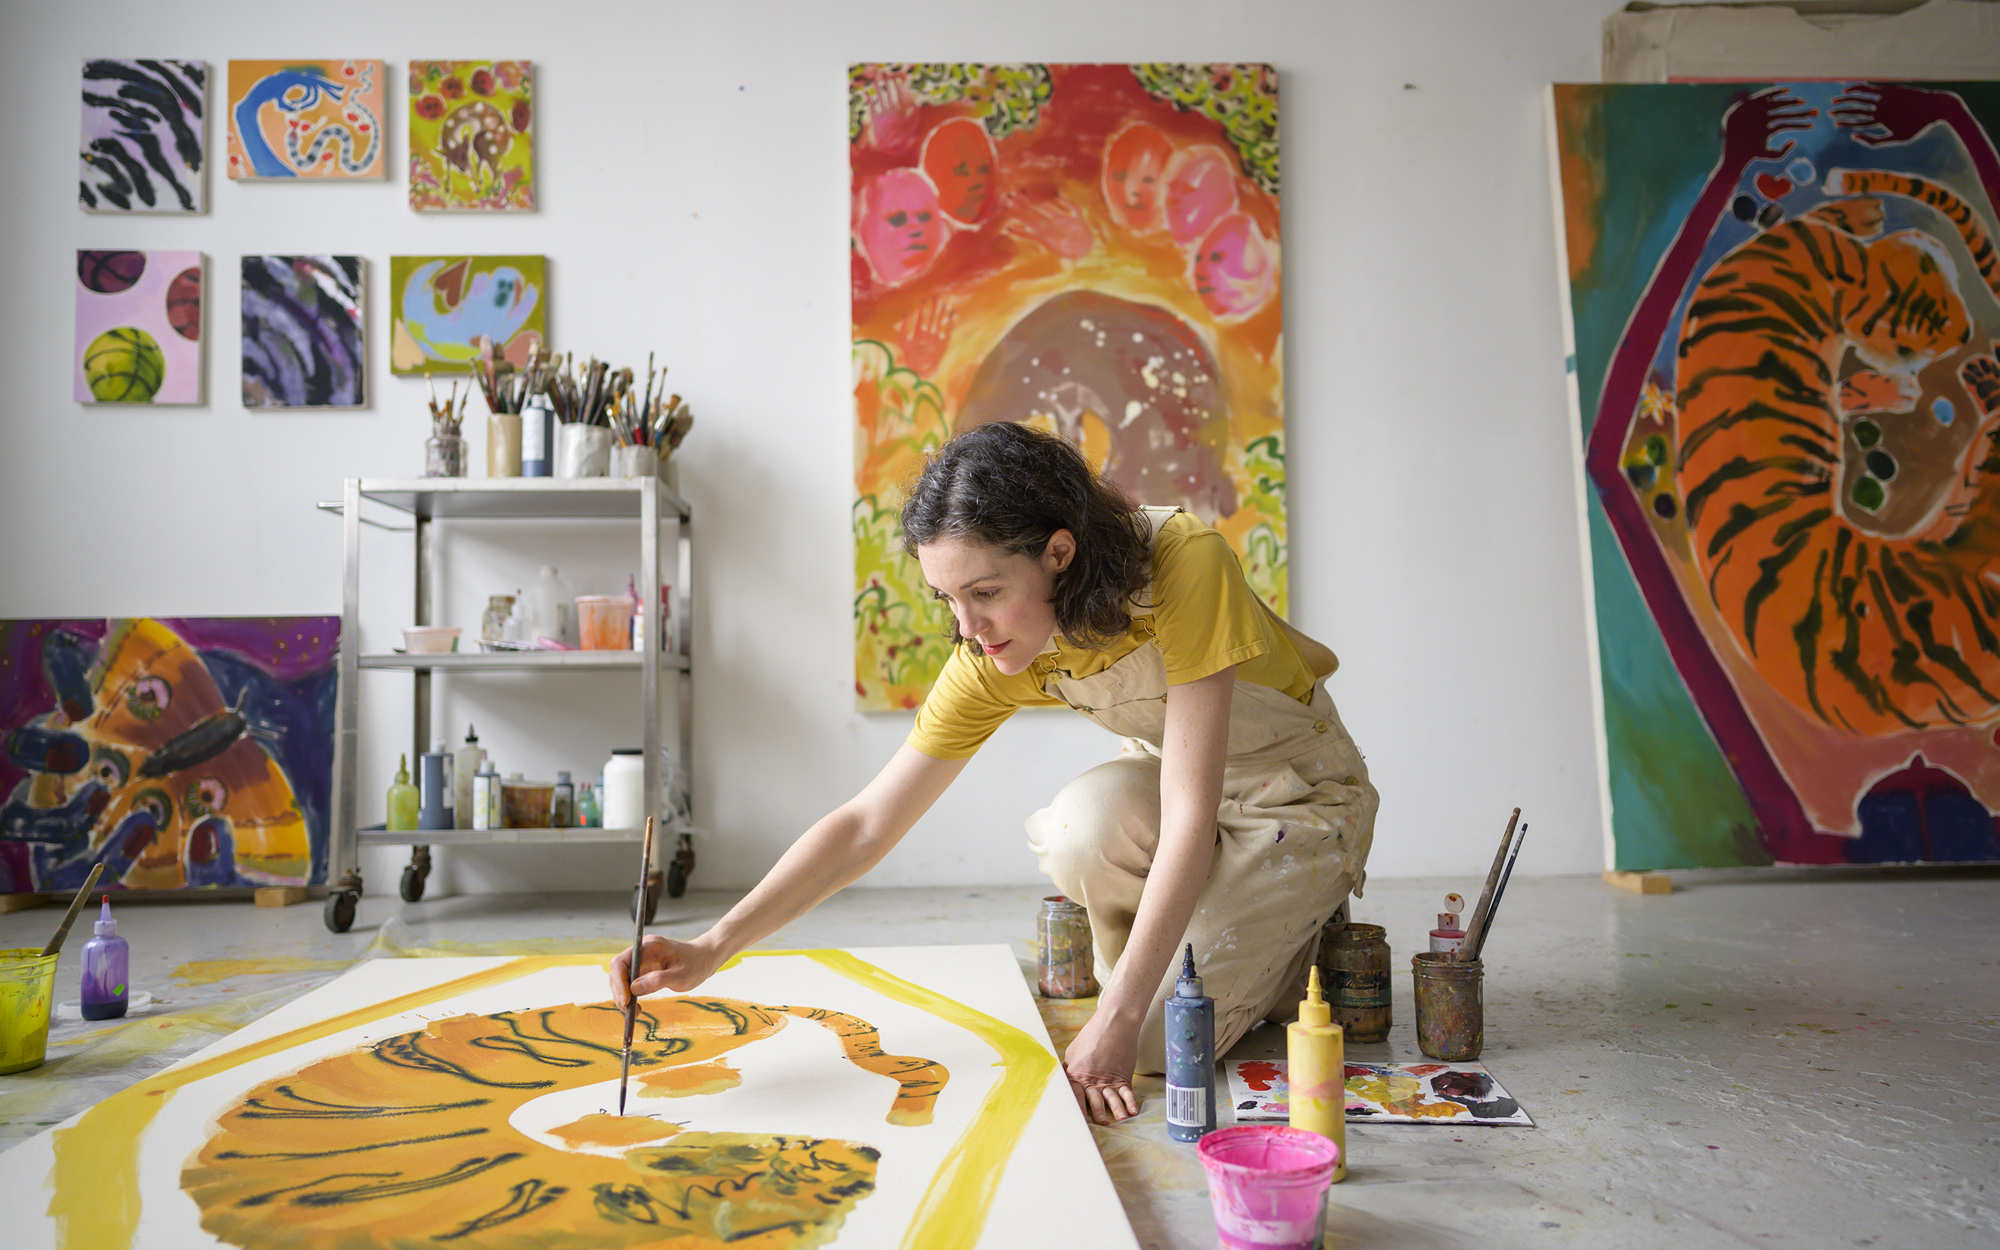 Photo of a woman painting, taken with the NIKKOR Z 24mm f/1.8 S lens